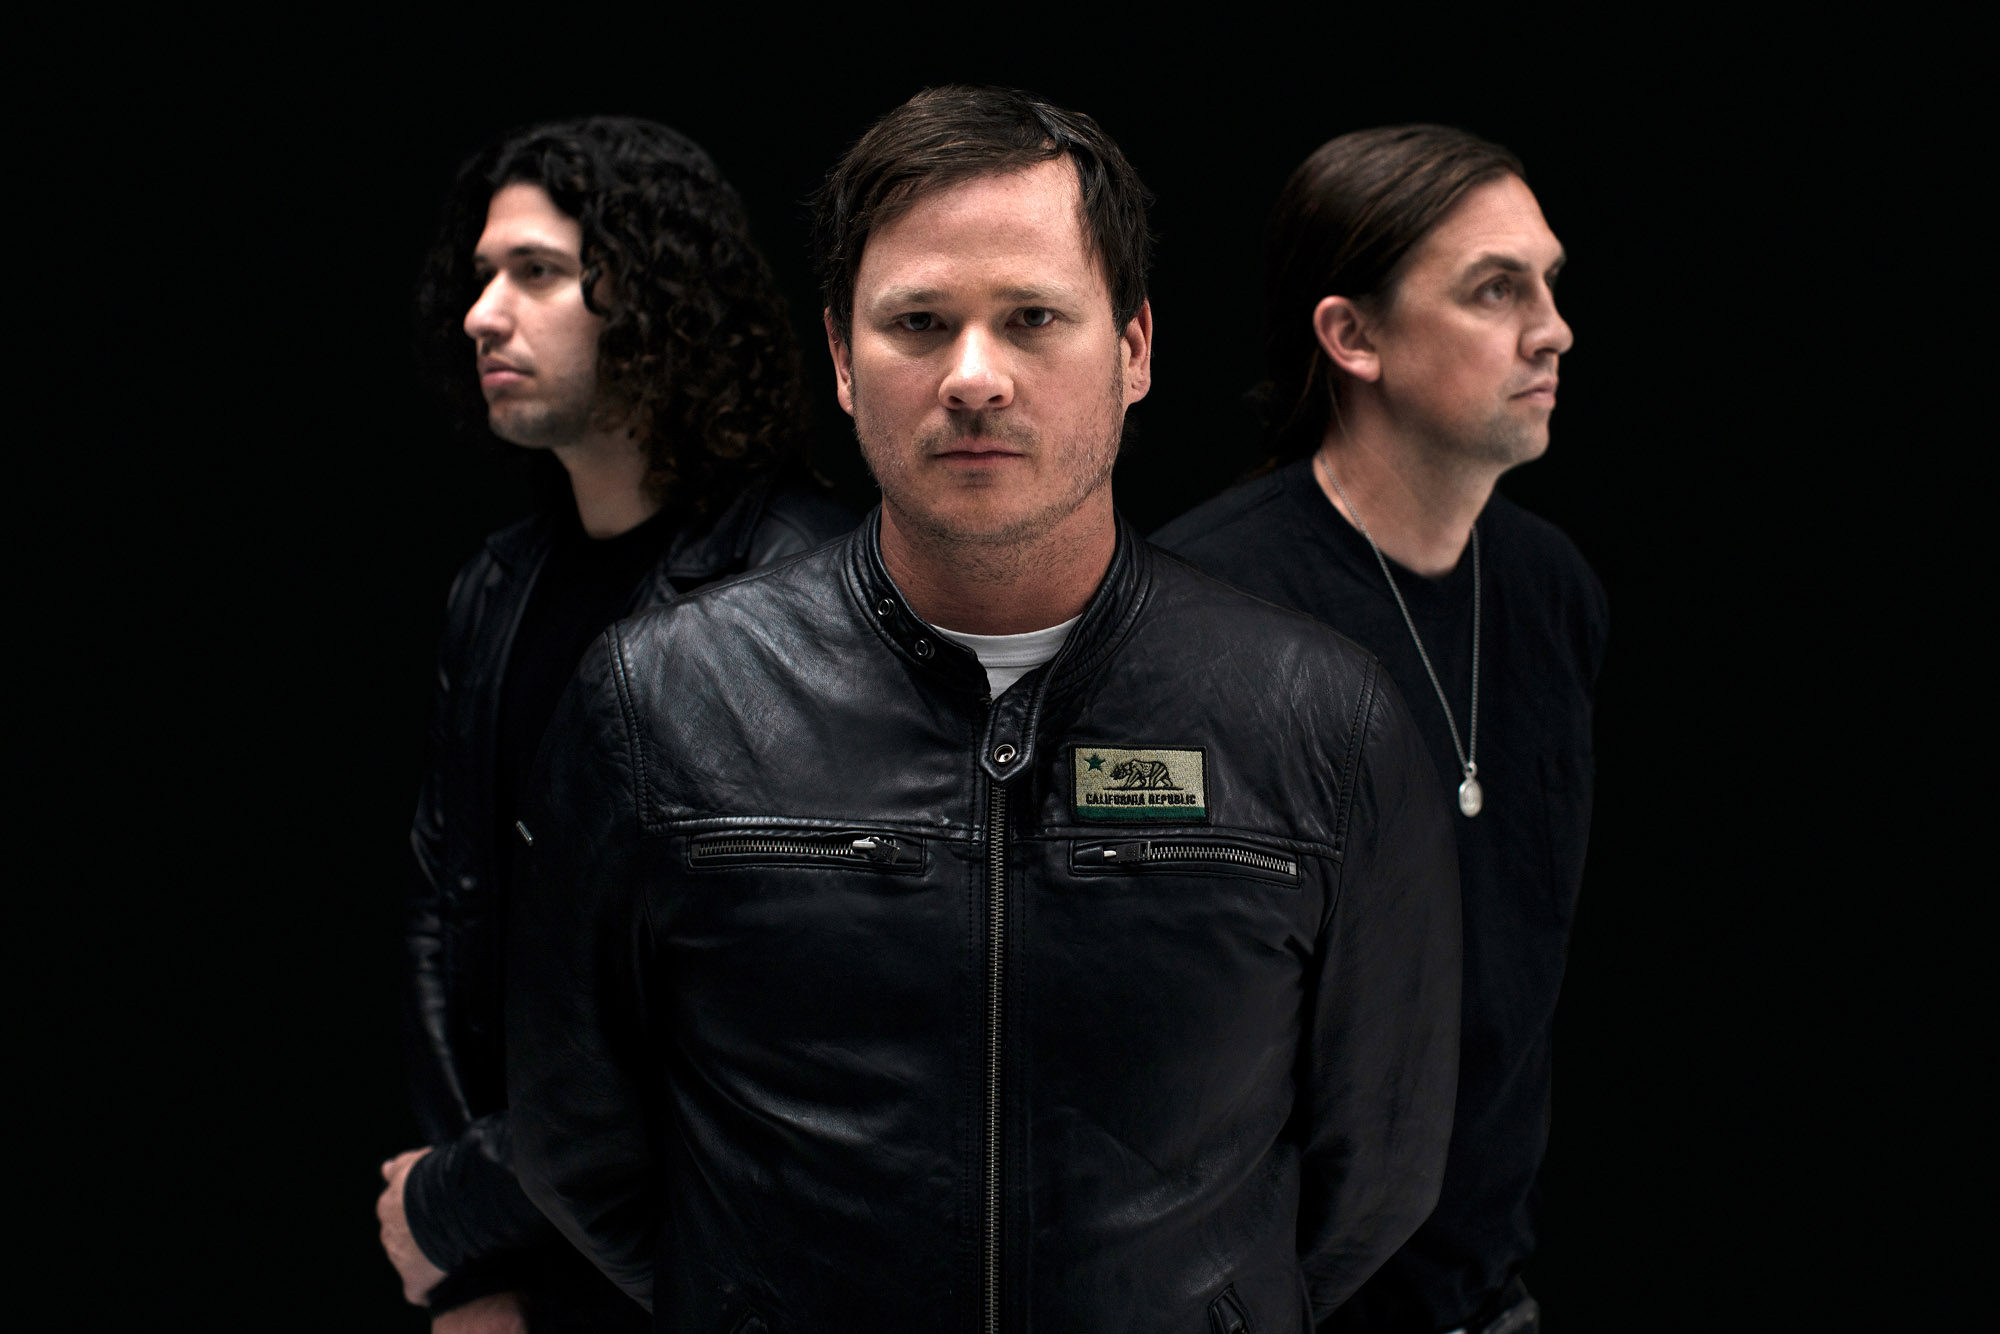 ANGELS & AIRWAVES RELEASE MUSIC VIDEO FOR “ALL THAT’S LEFT IS LOVE”